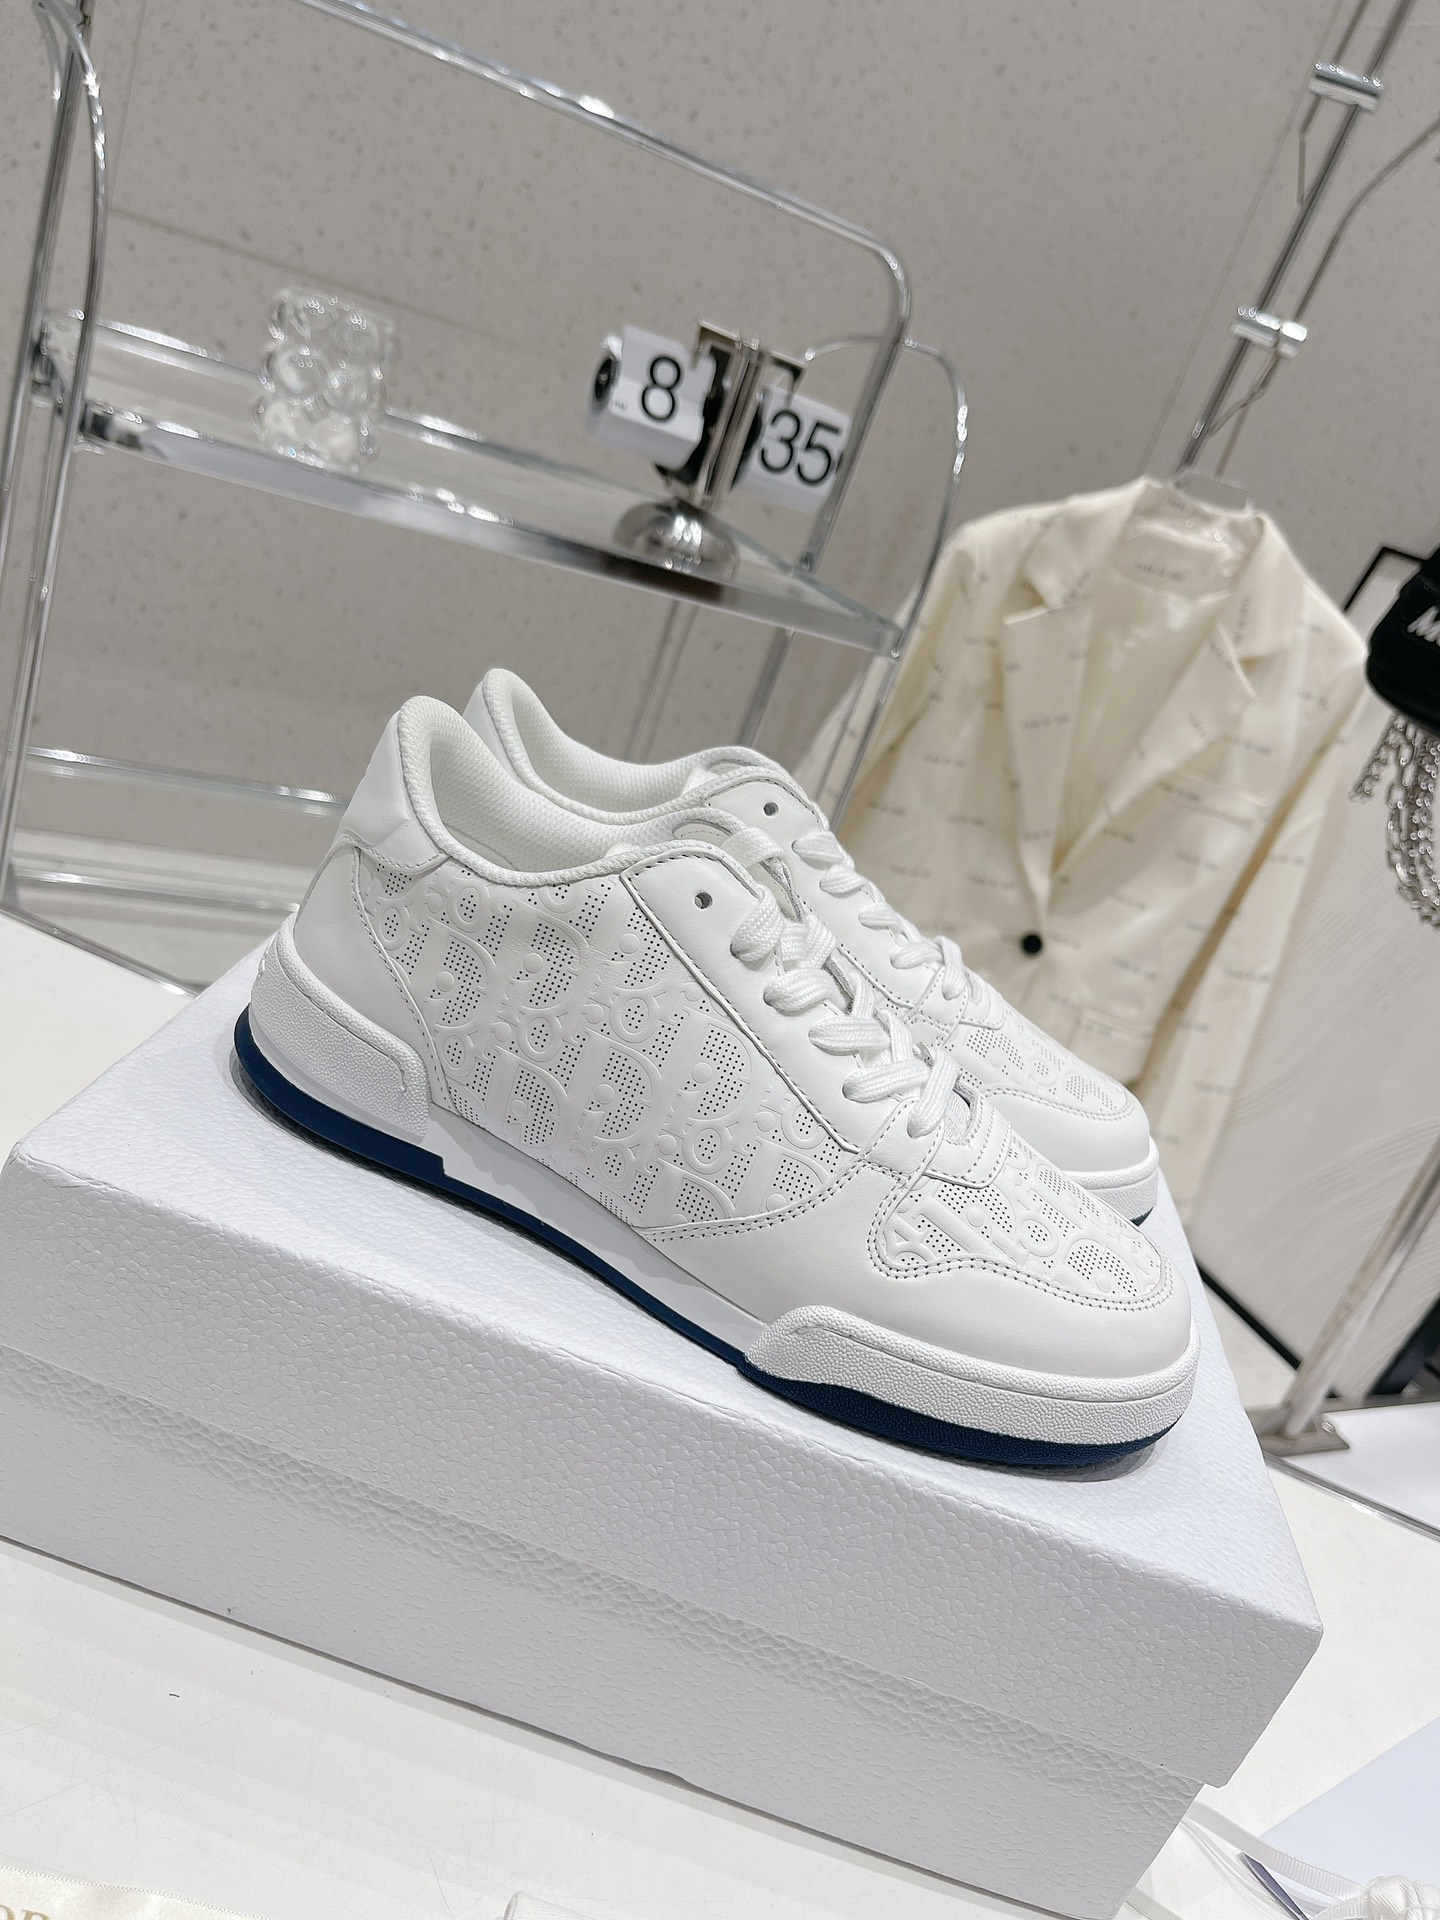 Dior Skateboard Shoes Sneakers White Openwork Women Cowhide TPU Oblique Casual